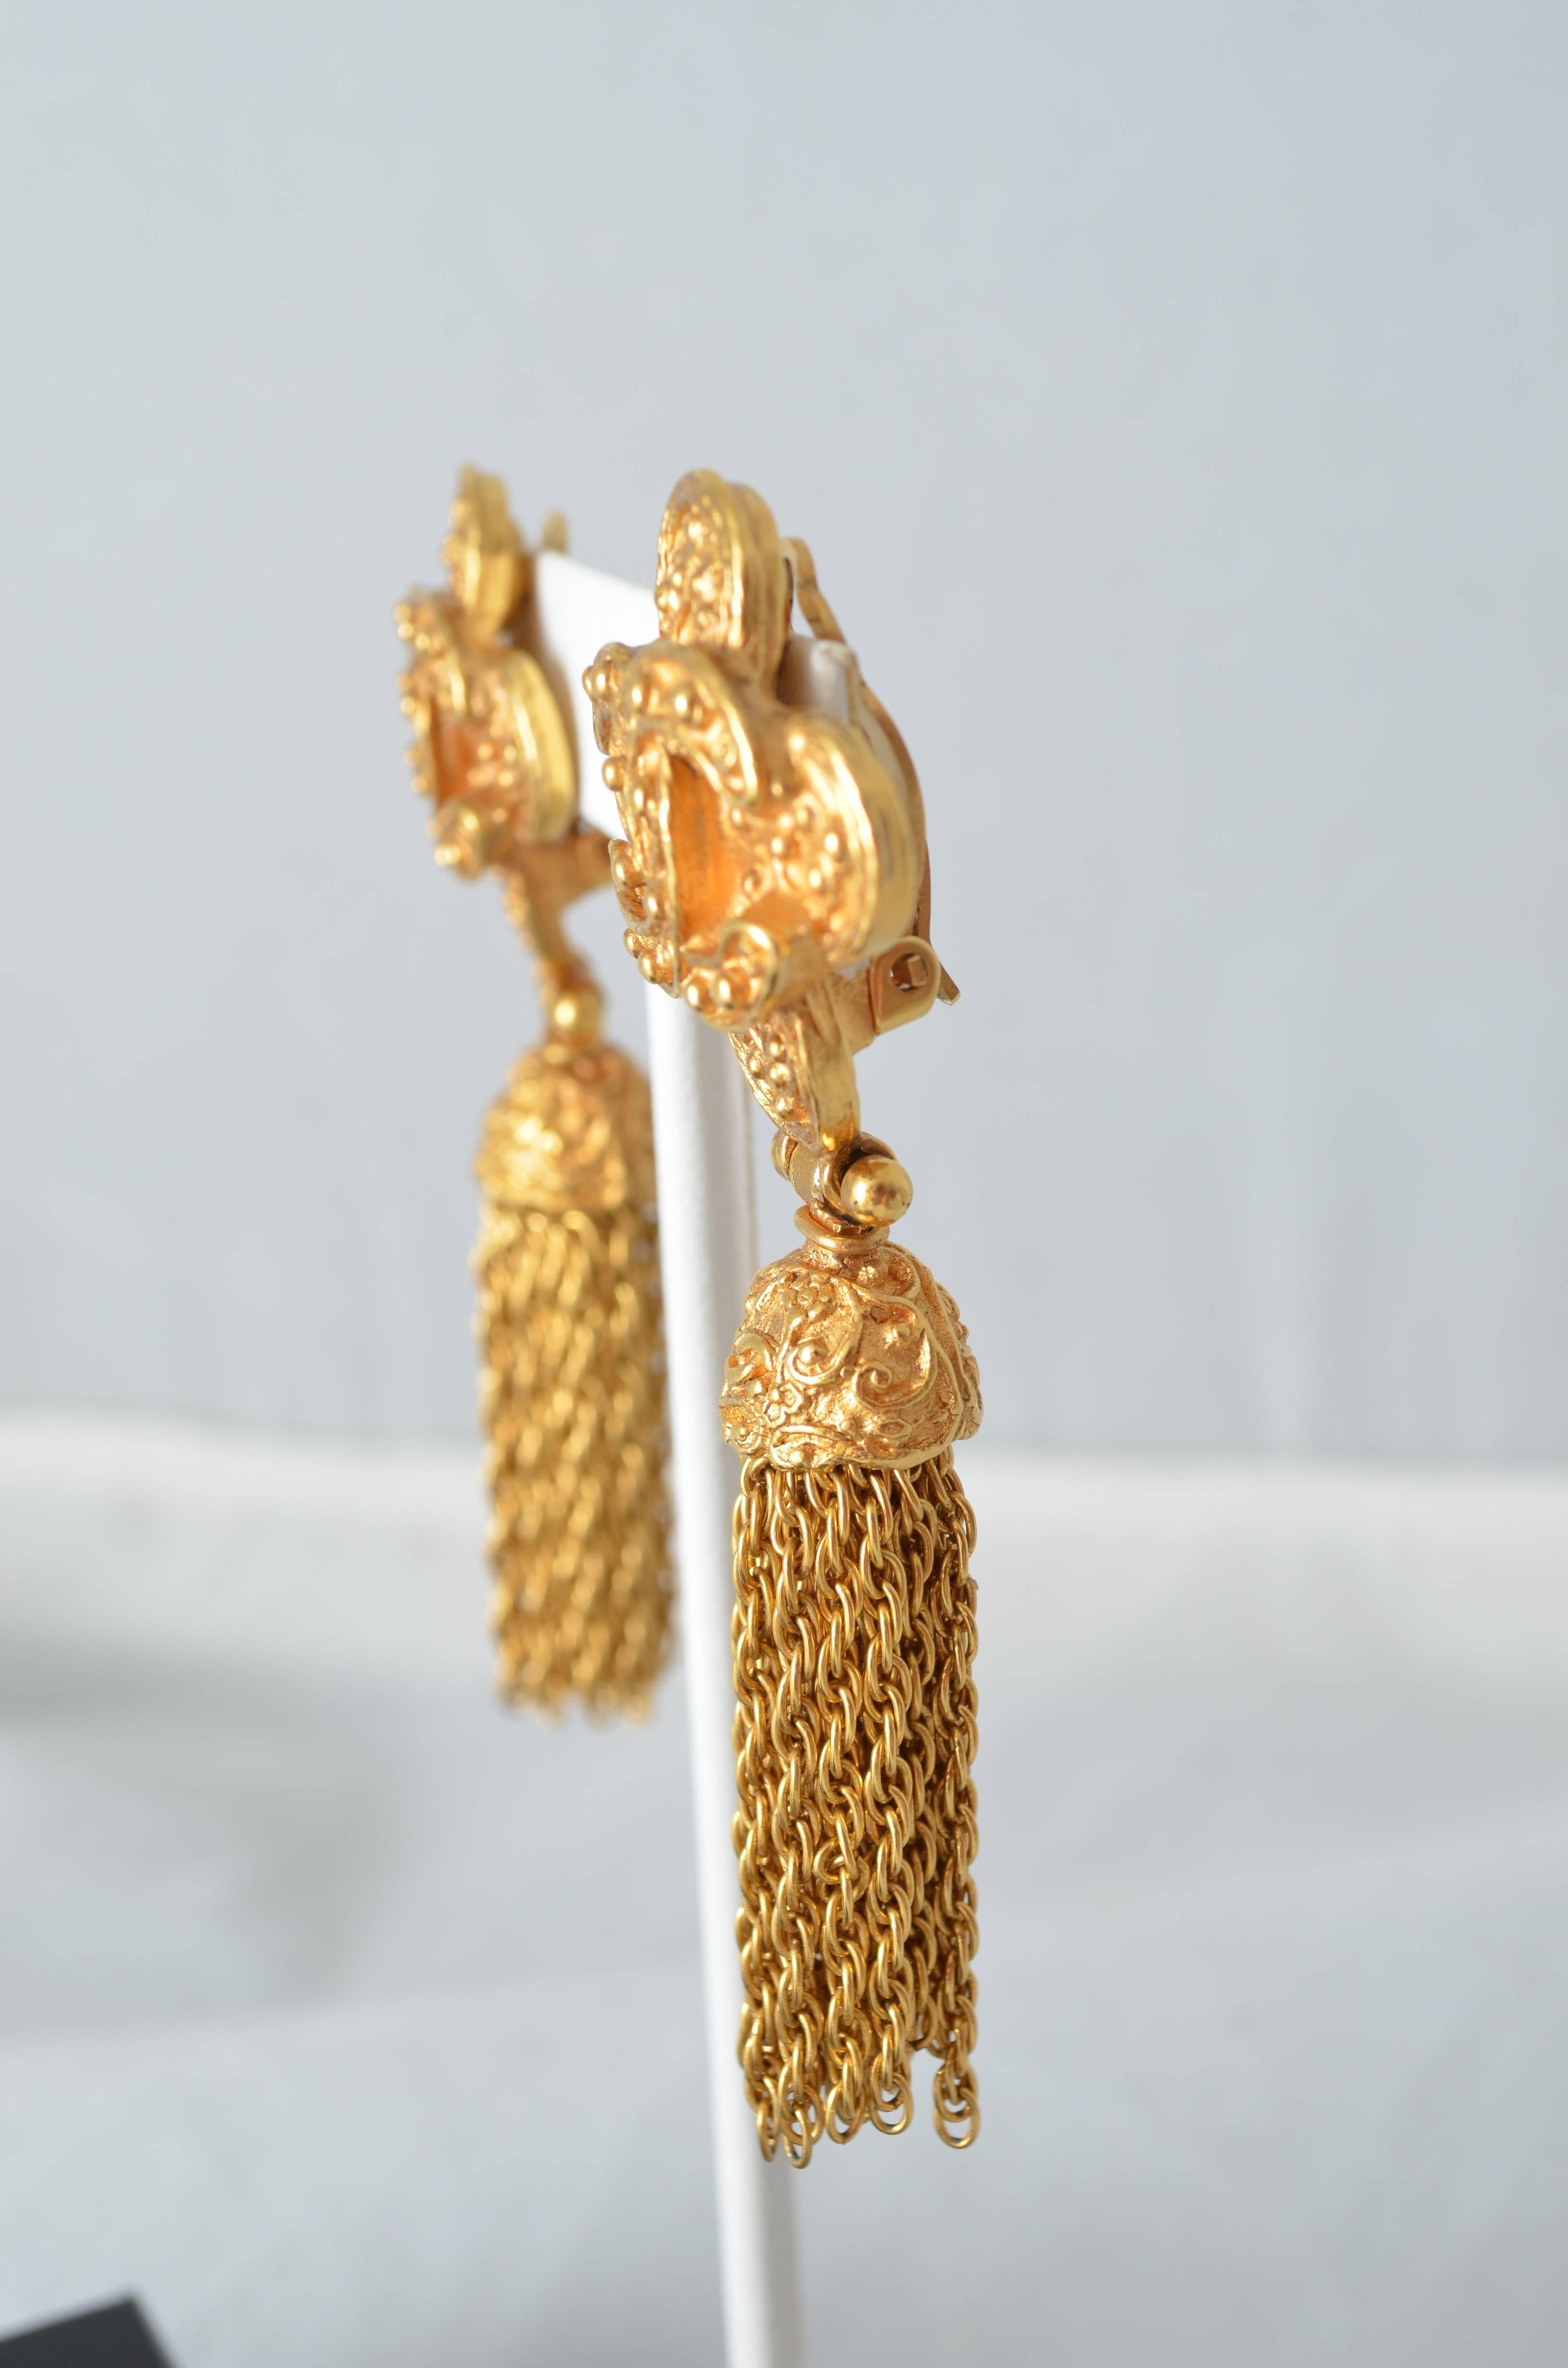 Chanel gold tone metal drop/chandelier clip earrings with gold chain fringe tassel in box. Logo on inside of back of earring stamped Chanel, 94A, Made in France . Bottom half of earring hinges with attached chain fringe rope detail. Excellent